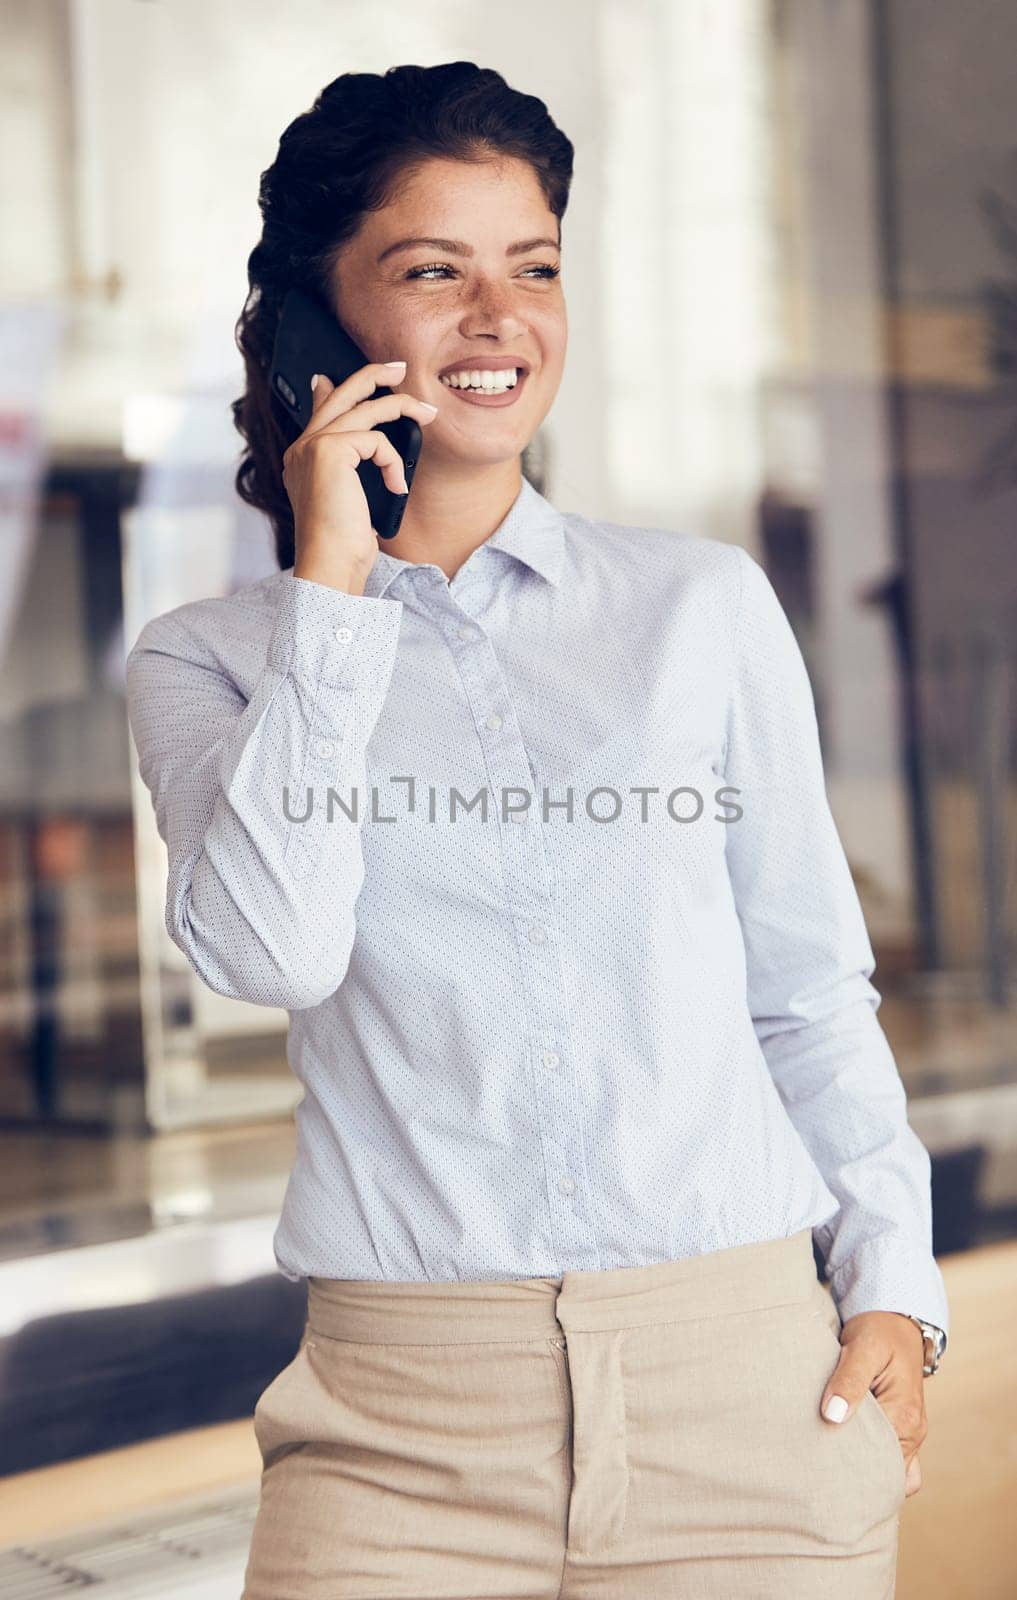 portrait of a smiling happy young girl talking on a cell phone. A business woman talking on the phone